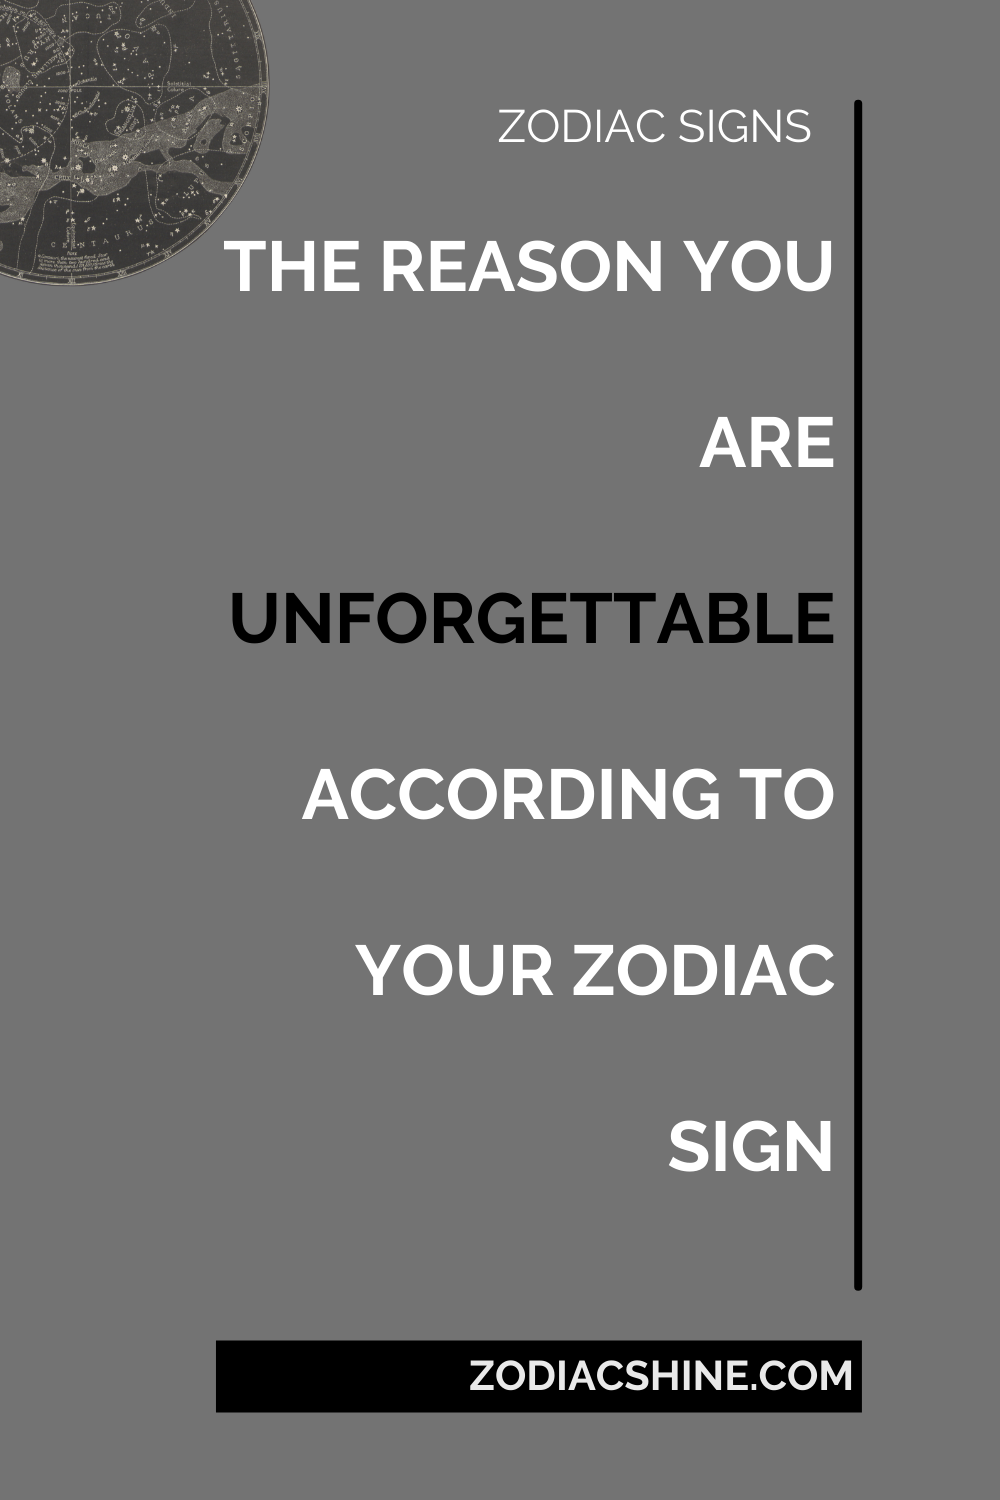 THE REASON YOU ARE UNFORGETTABLE ACCORDING TO YOUR ZODIAC SIGN